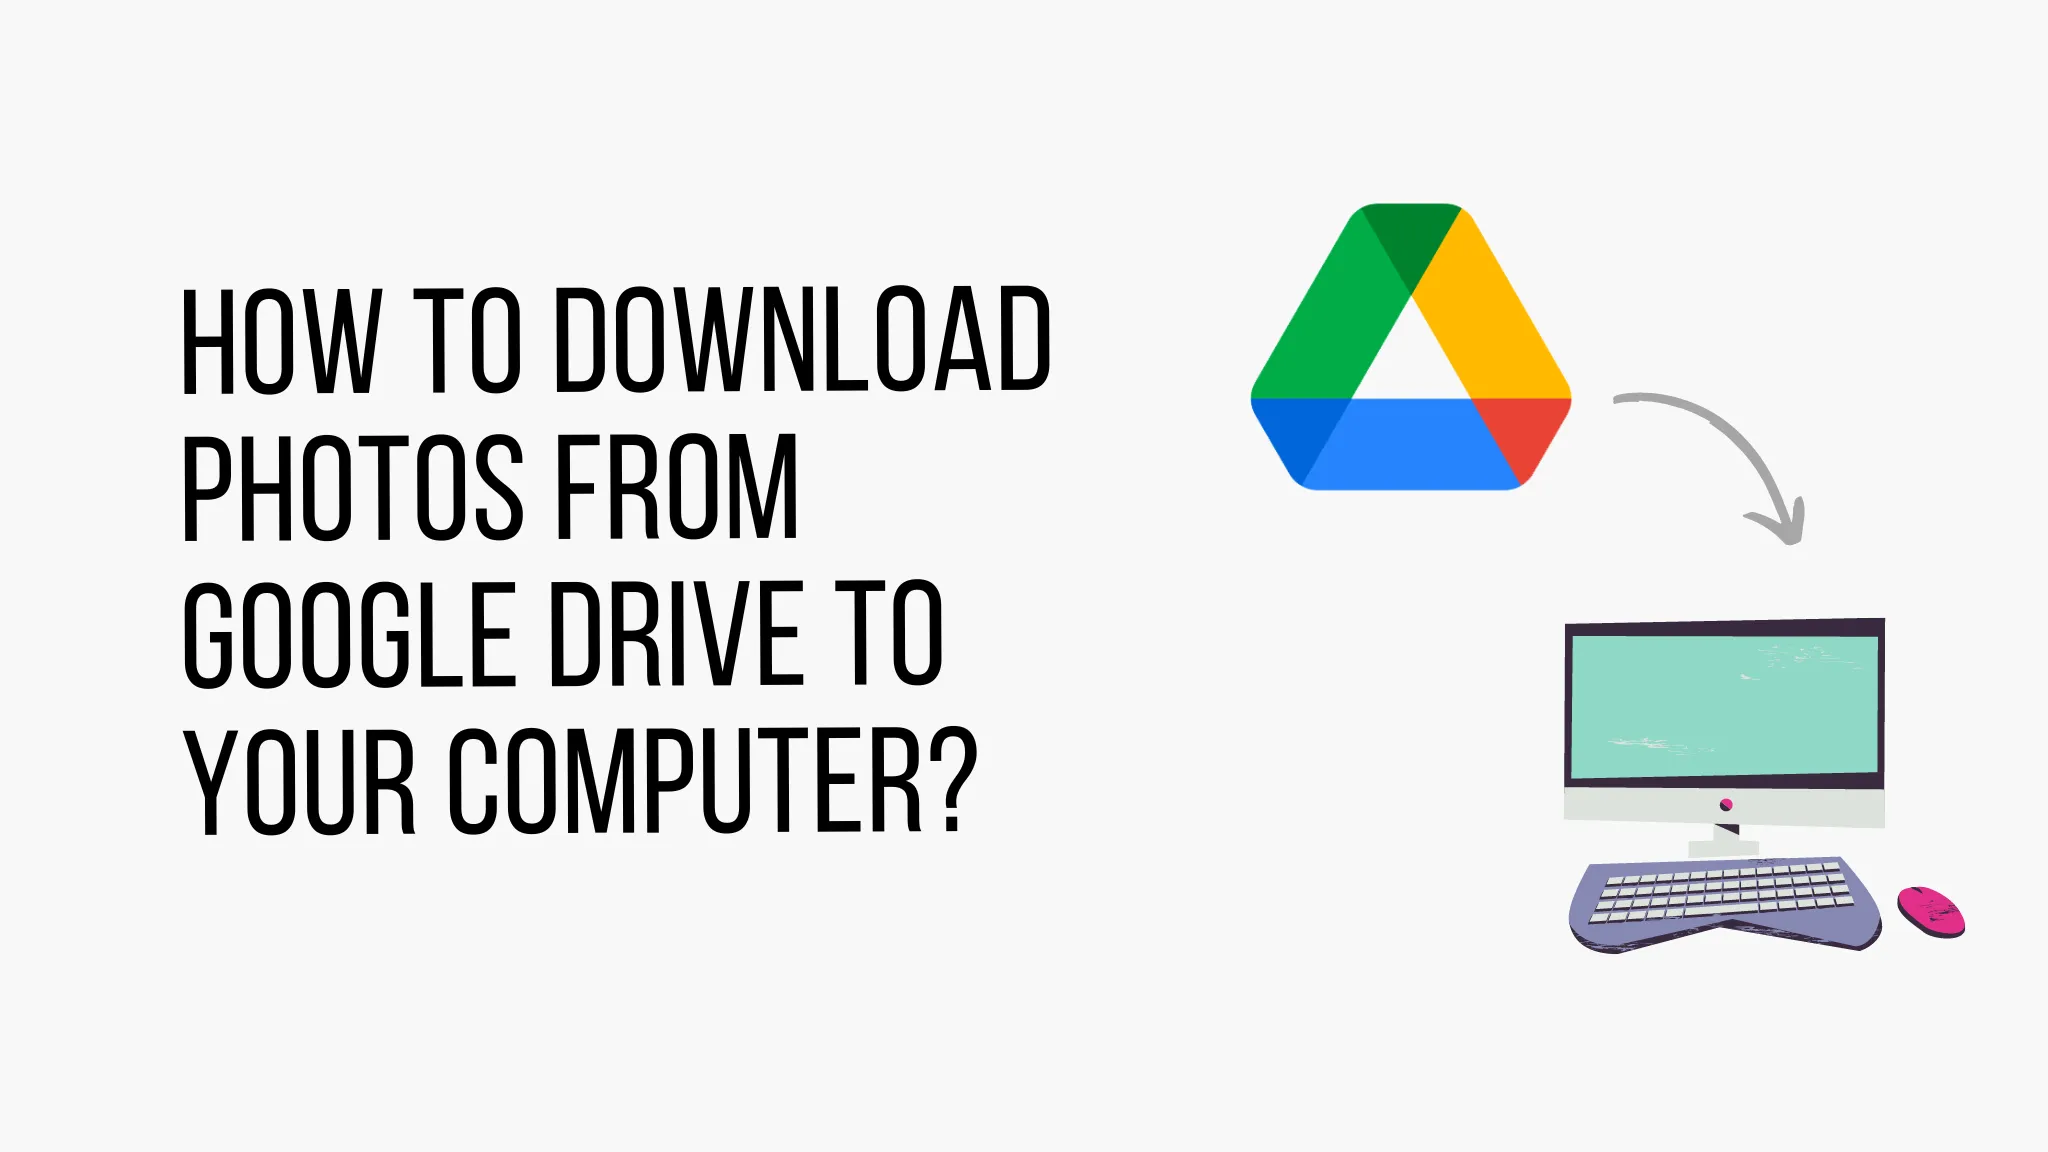 HOW TO DOWNLOAD PICTURES FROM GOOGLE PHOTOS